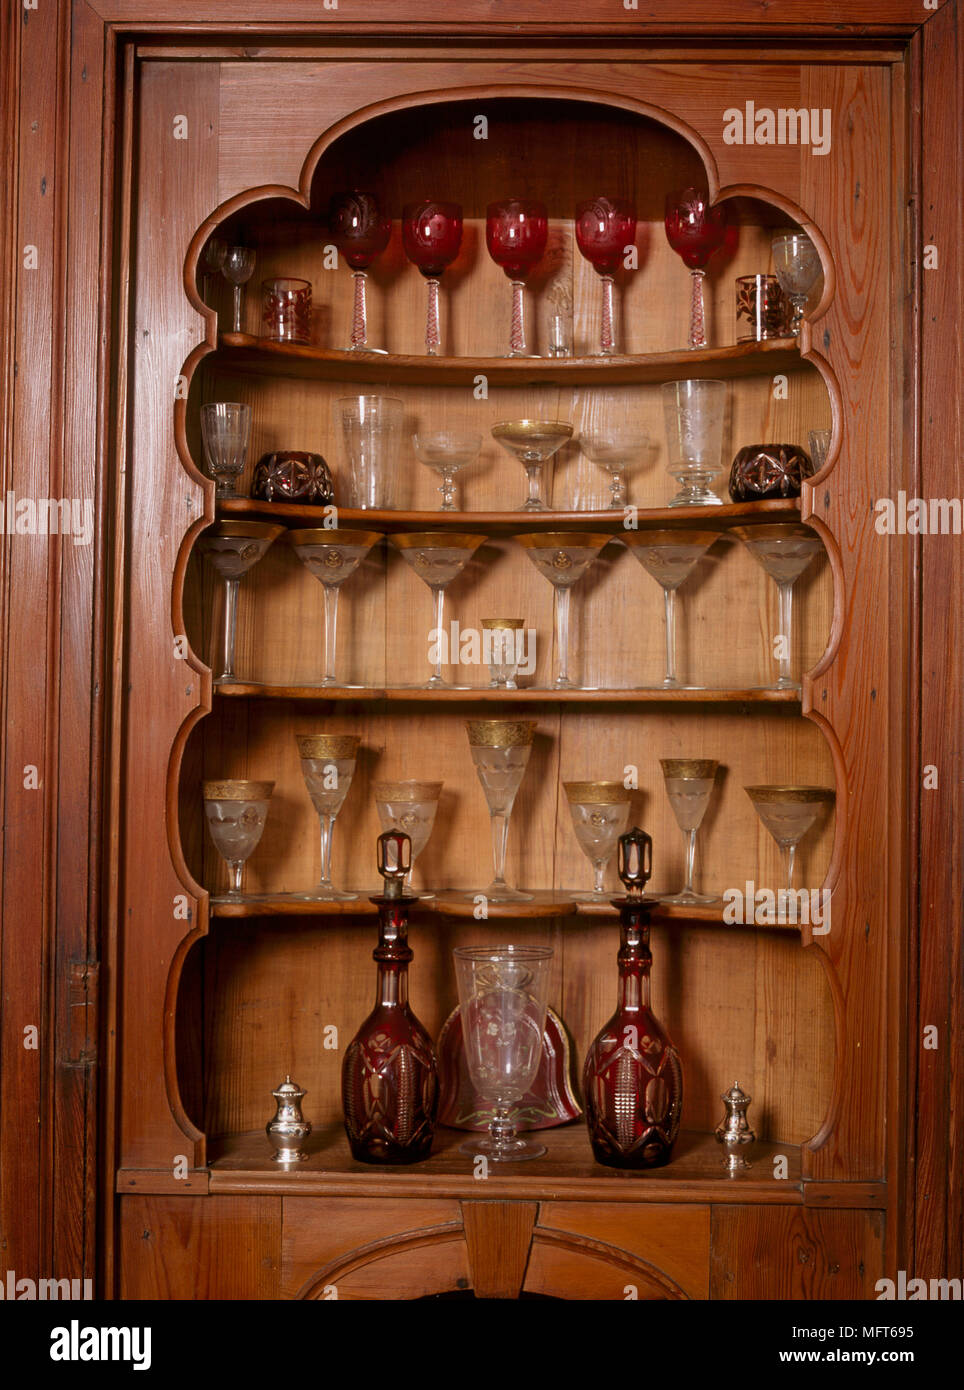 A detail of a traditional shelving unit with a display of glasses and decanters, Stock Photo